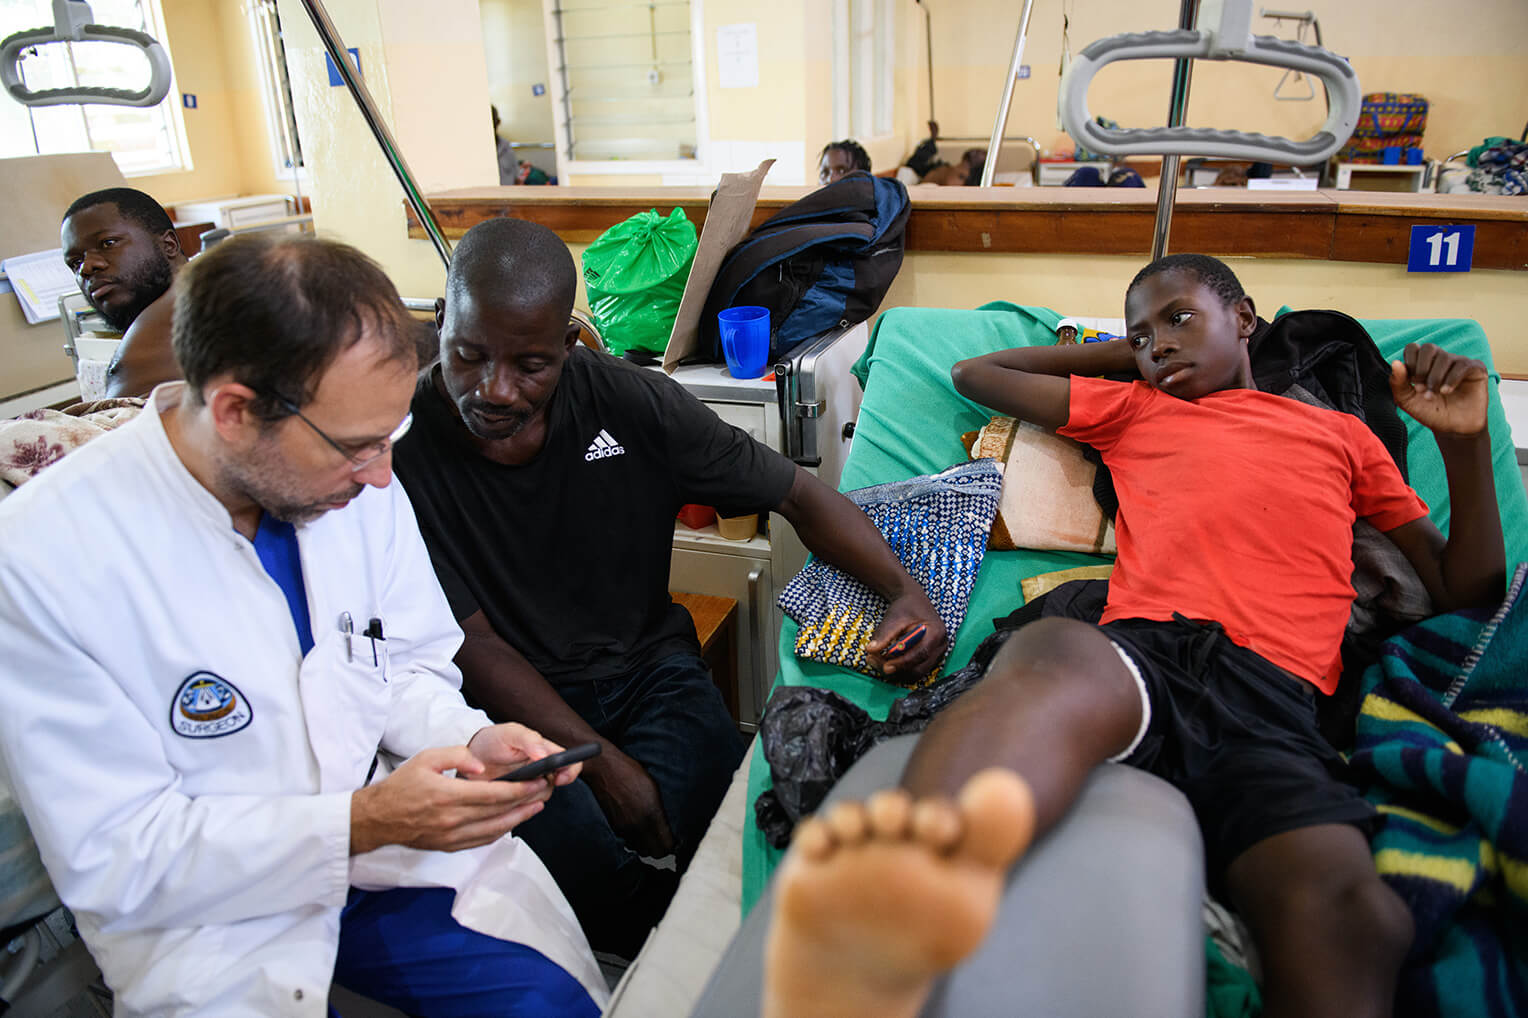 Steven and his father traveled from Mchinji, a town nearly 100 miles from Nkhoma Hospital, to receive vital surgery.